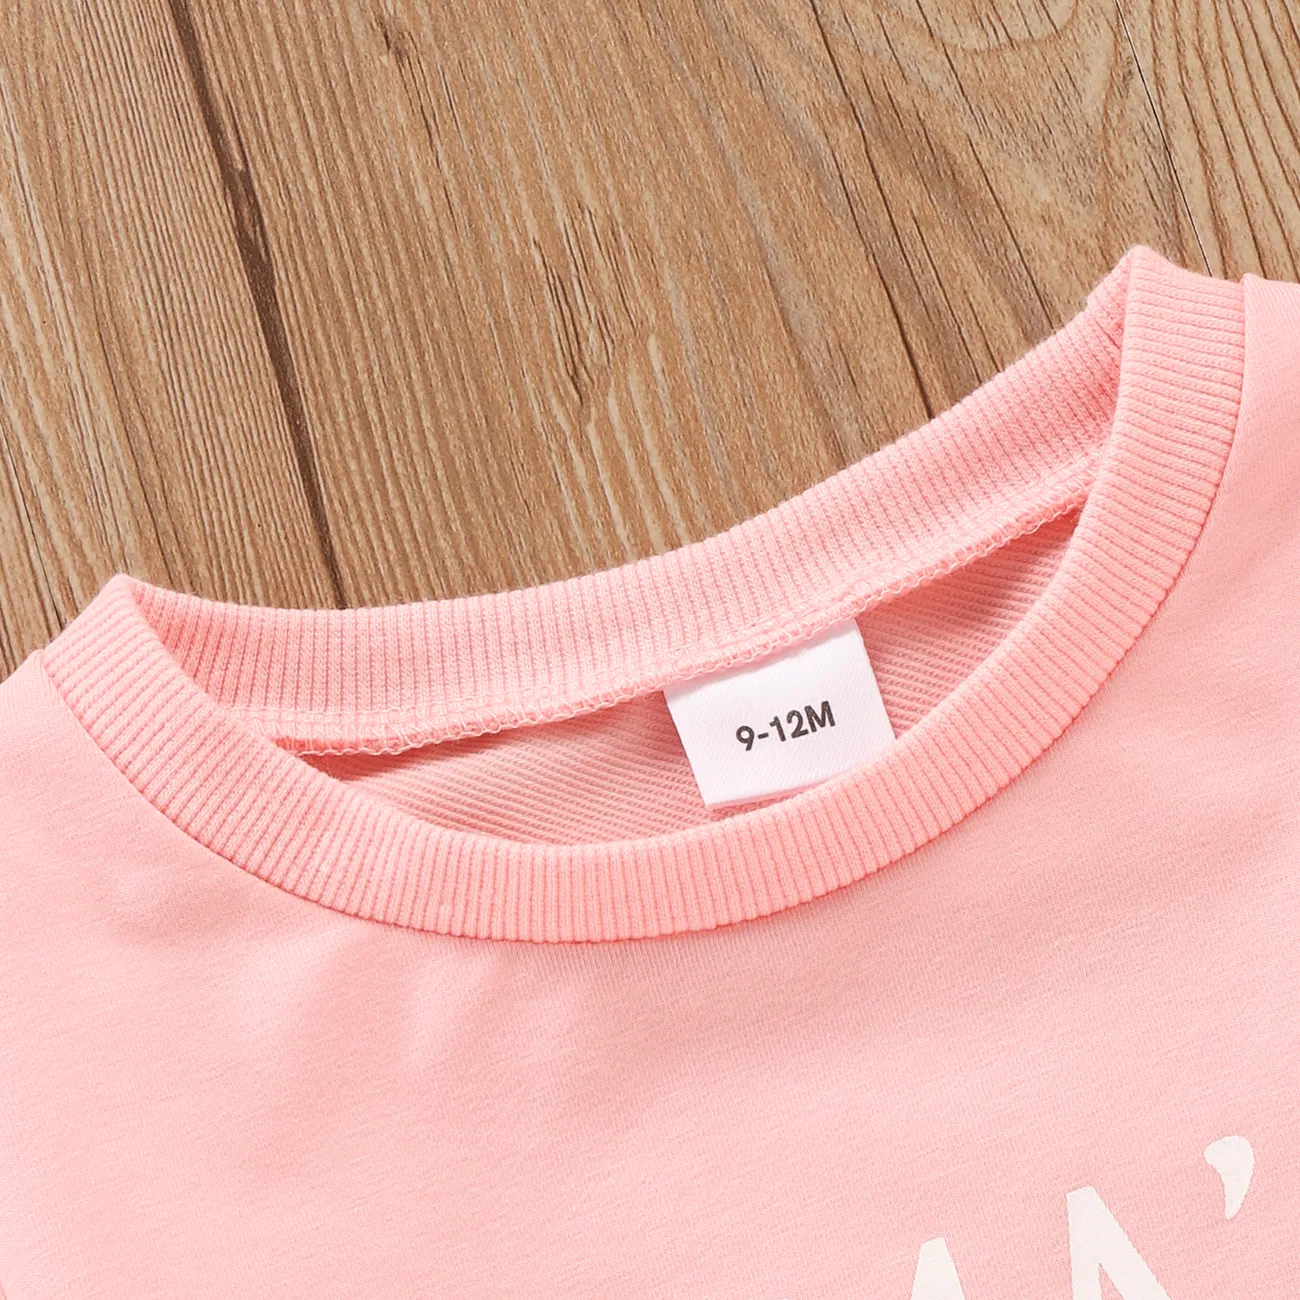 Letter Print Long-sleeve Pink Baby Pullover Top Pink big image 1